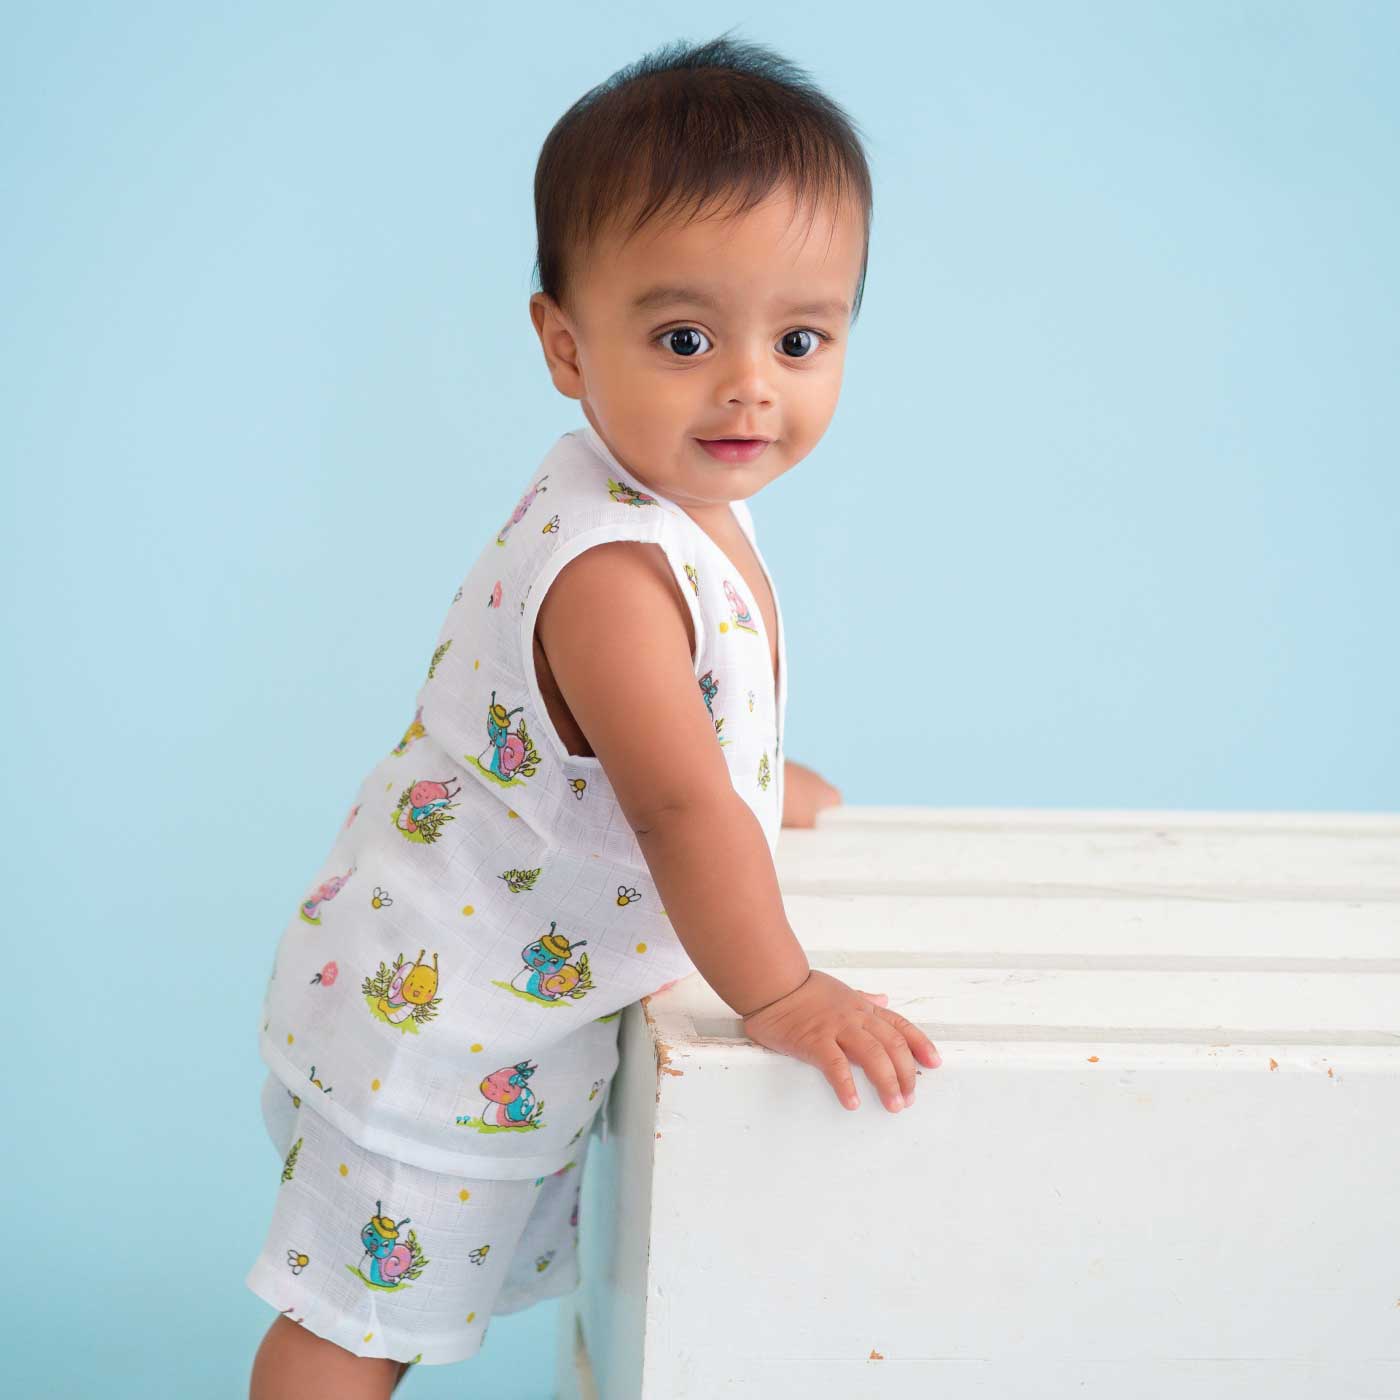 Snail Mail - Muslin Jabla and Shorts for Babies and Toddlers